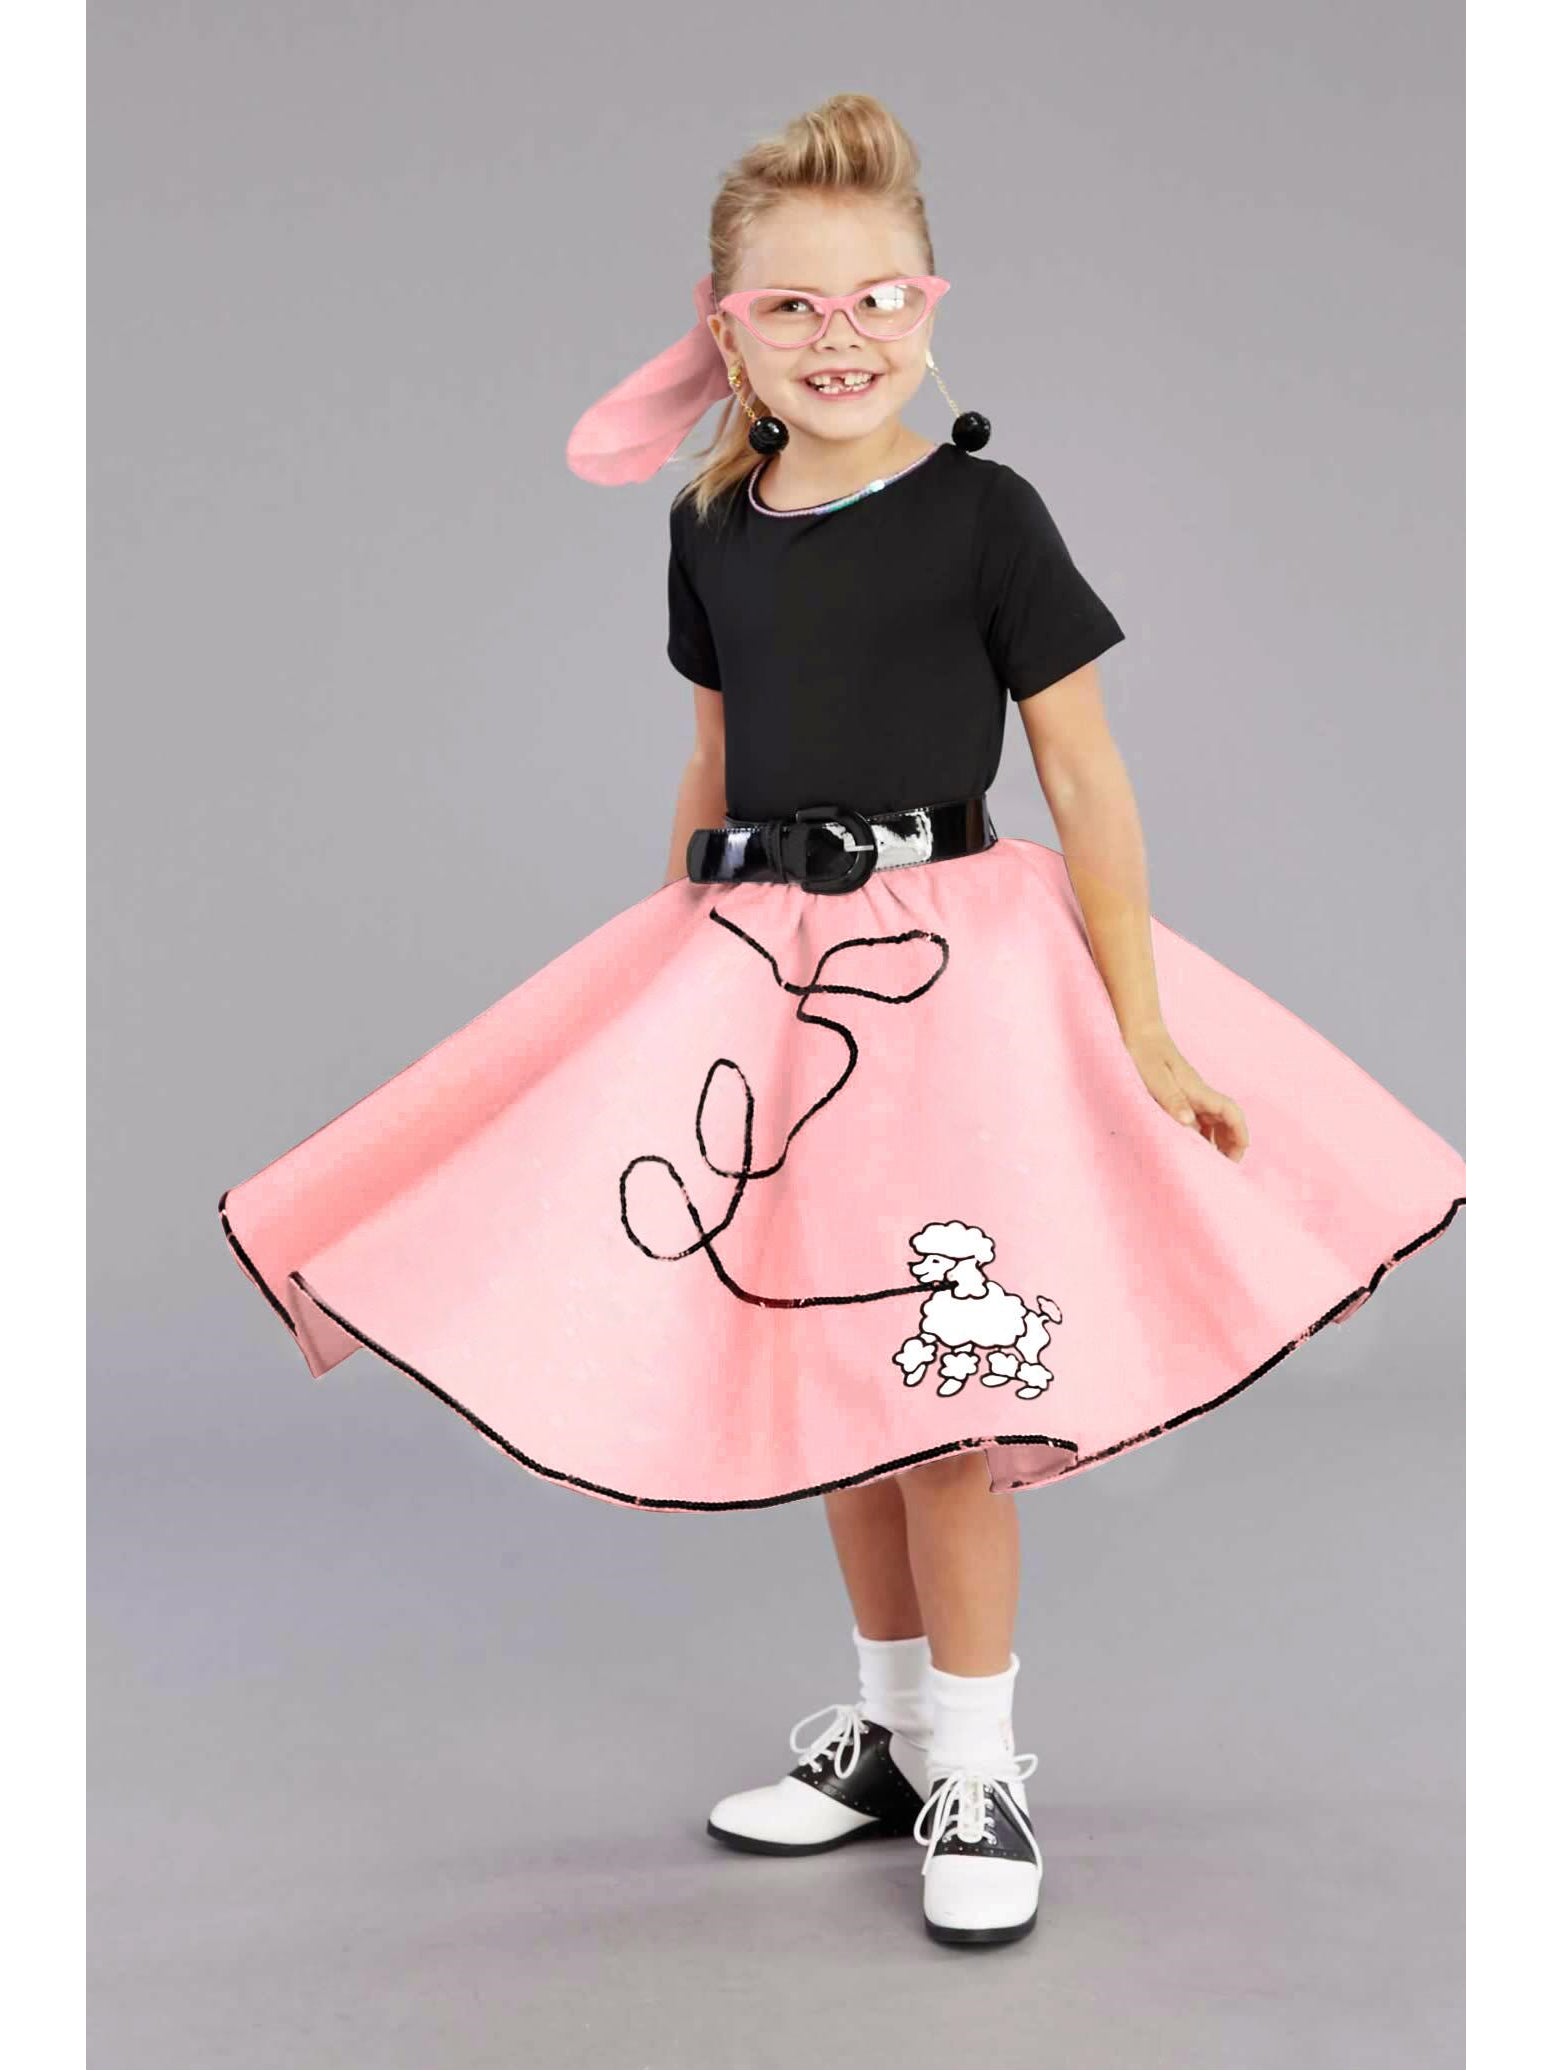 Fab 50s Costume For Girls Chasing Fireflies